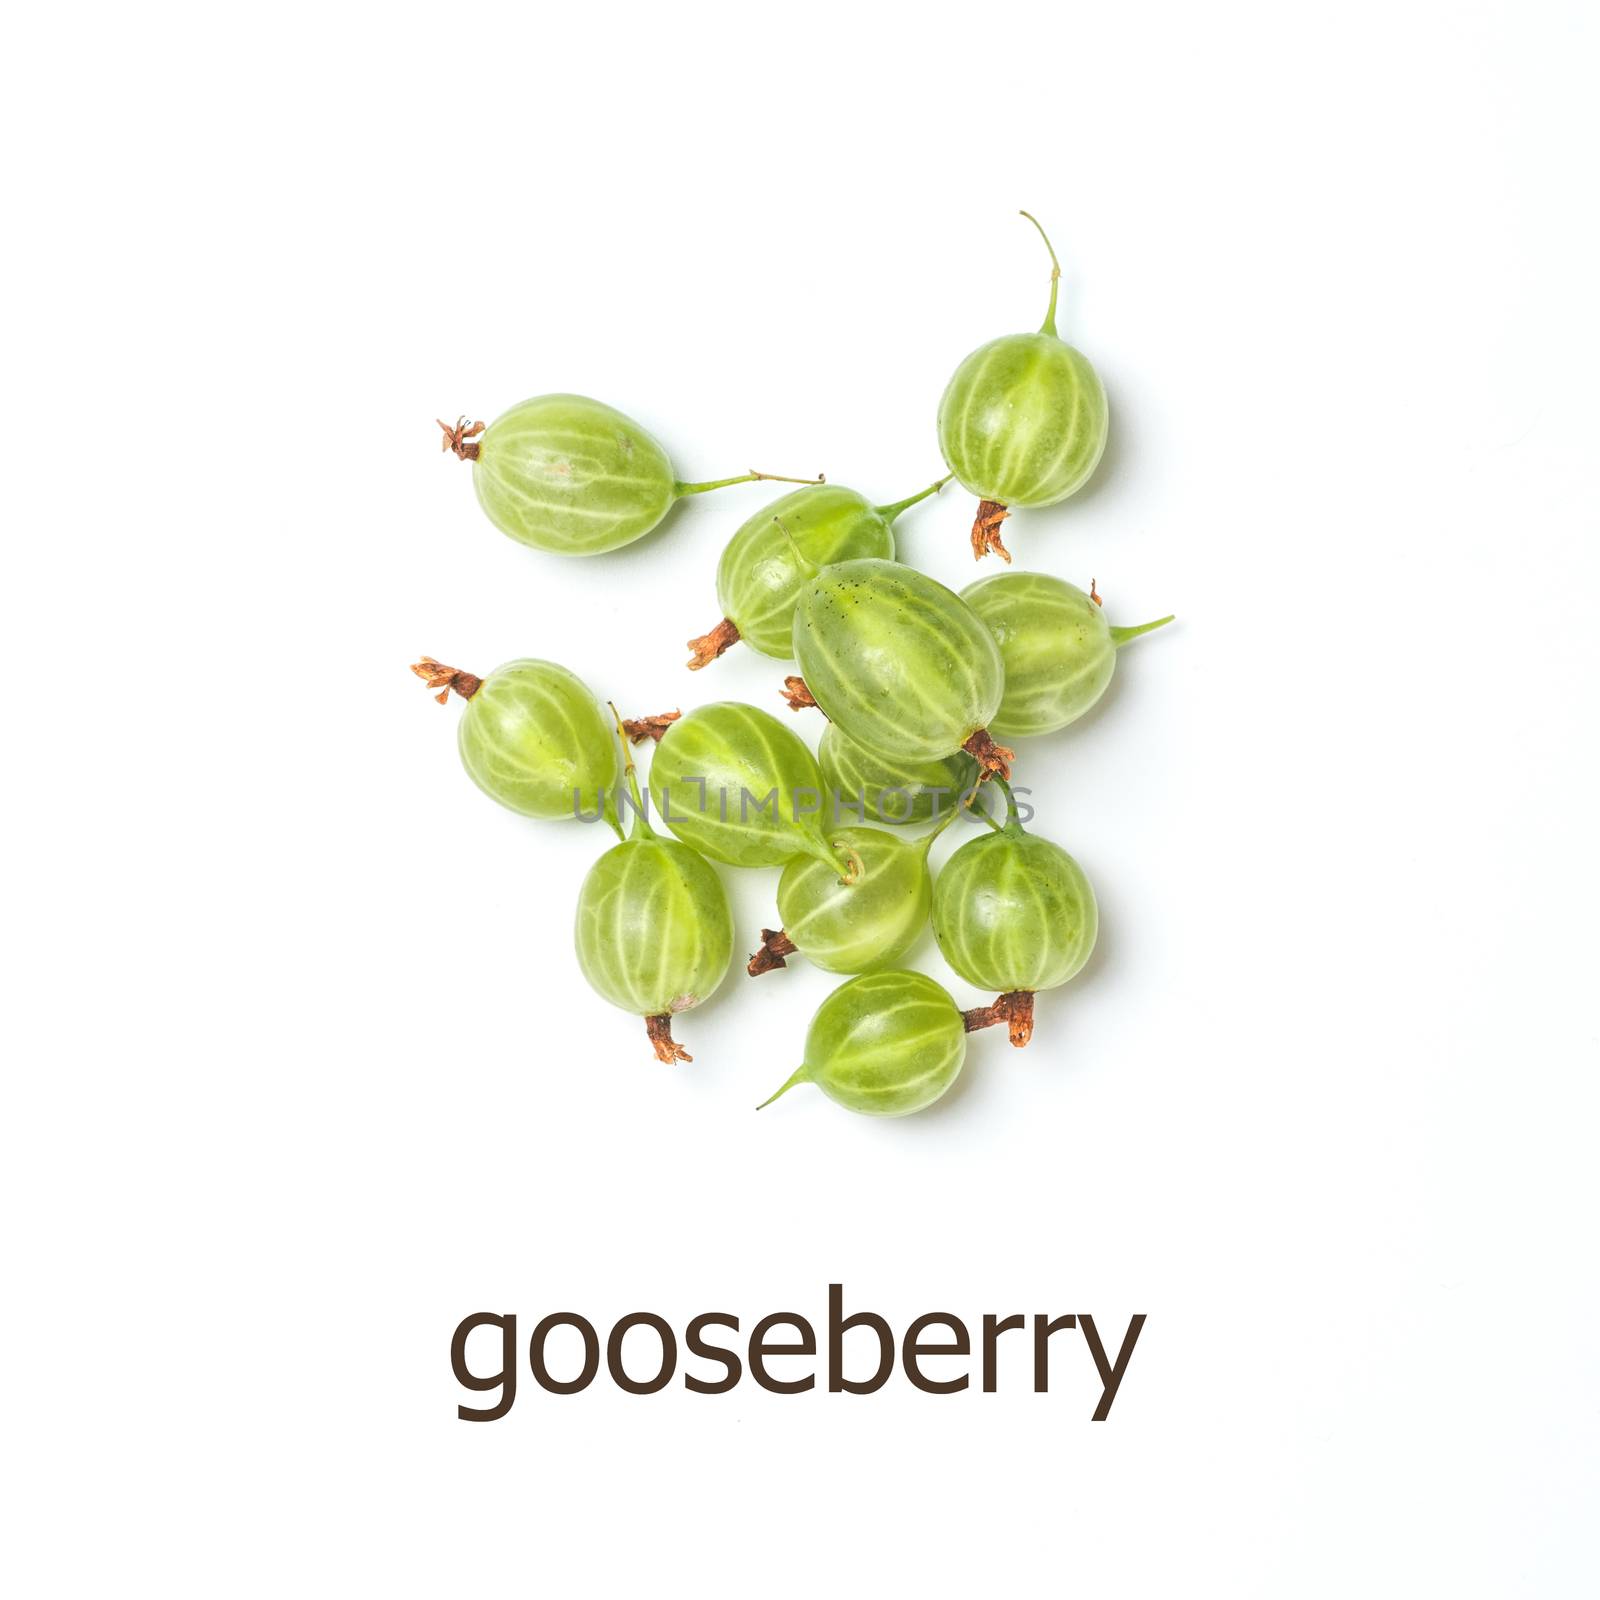 gooseberry isolated, copy space by fascinadora